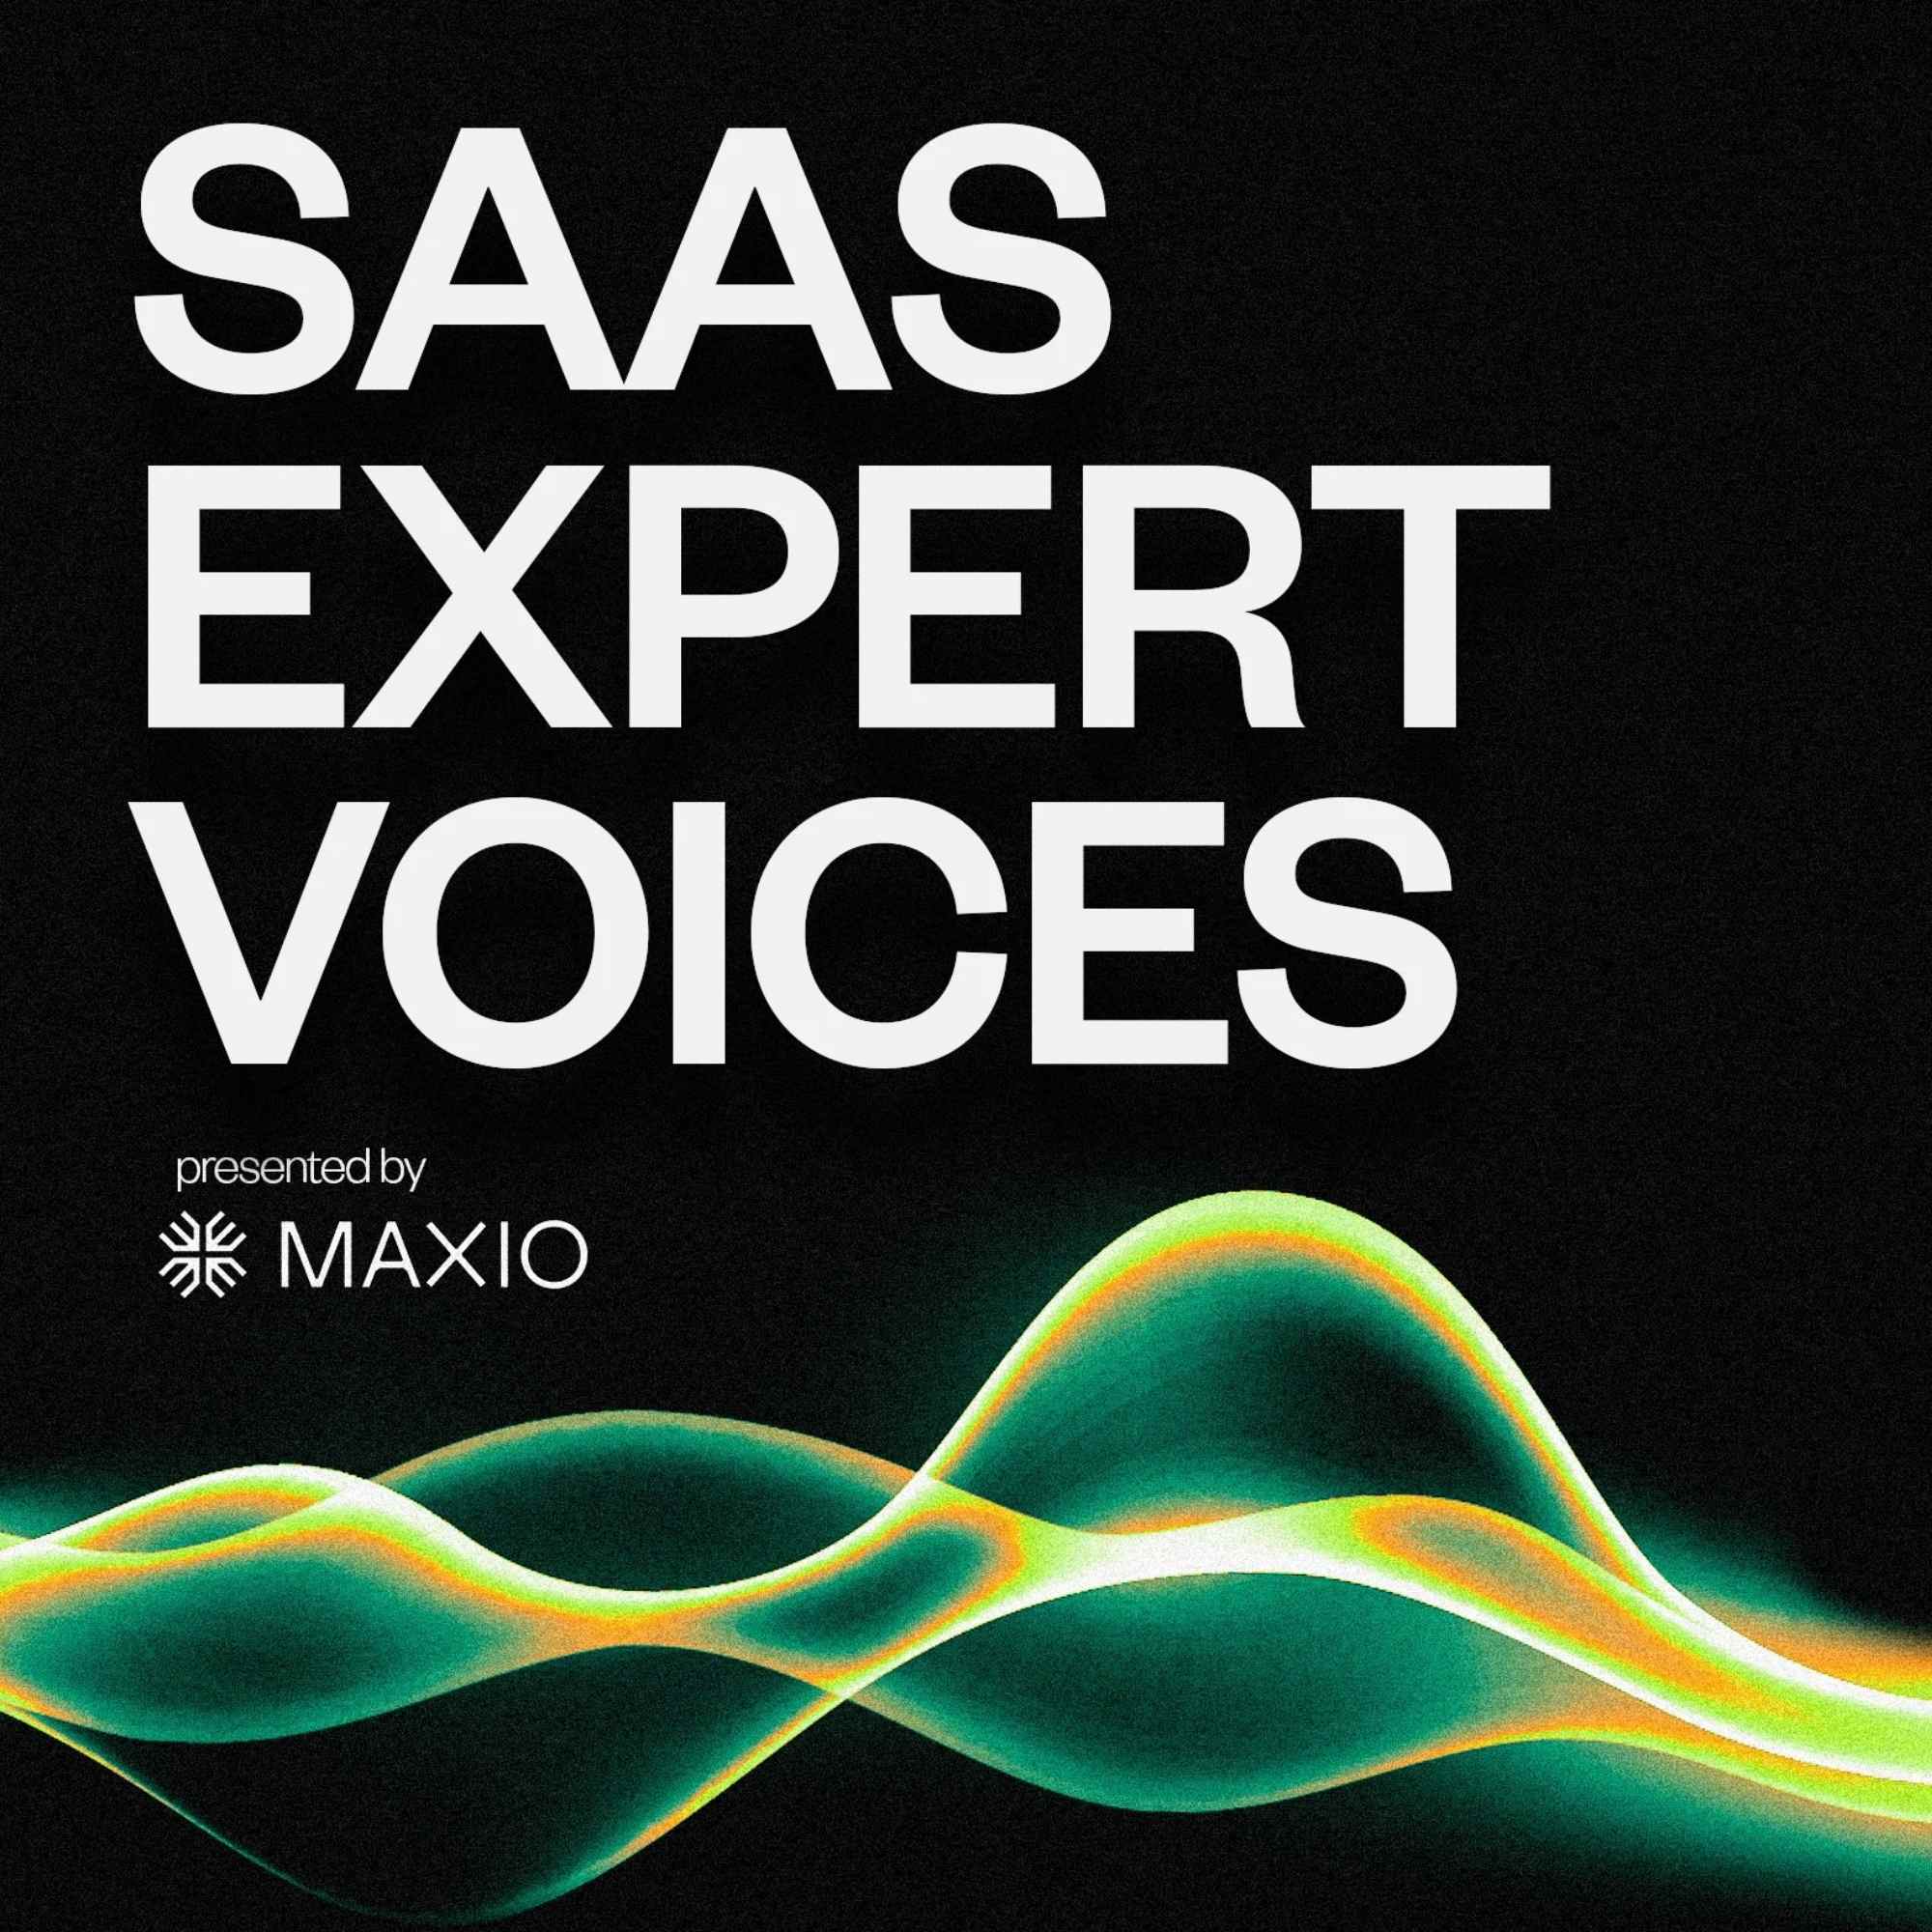 Artwork for SaaS Expert Voices presented by Maxio